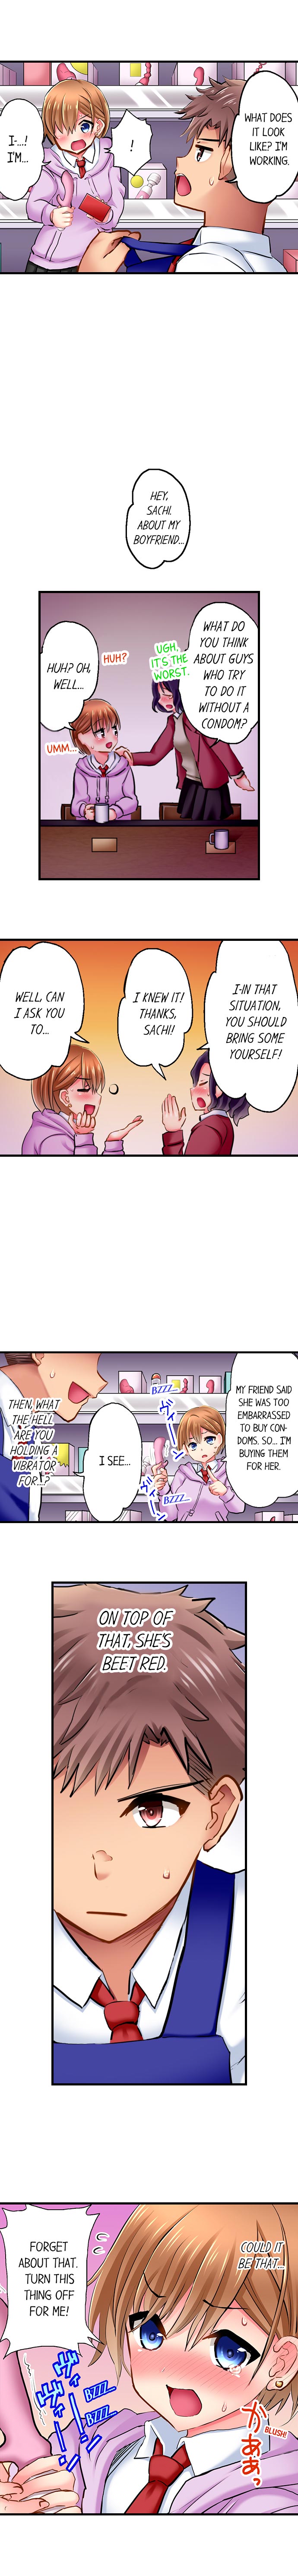 Sex in the Adult Toys Section - Chapter 2 Page 2